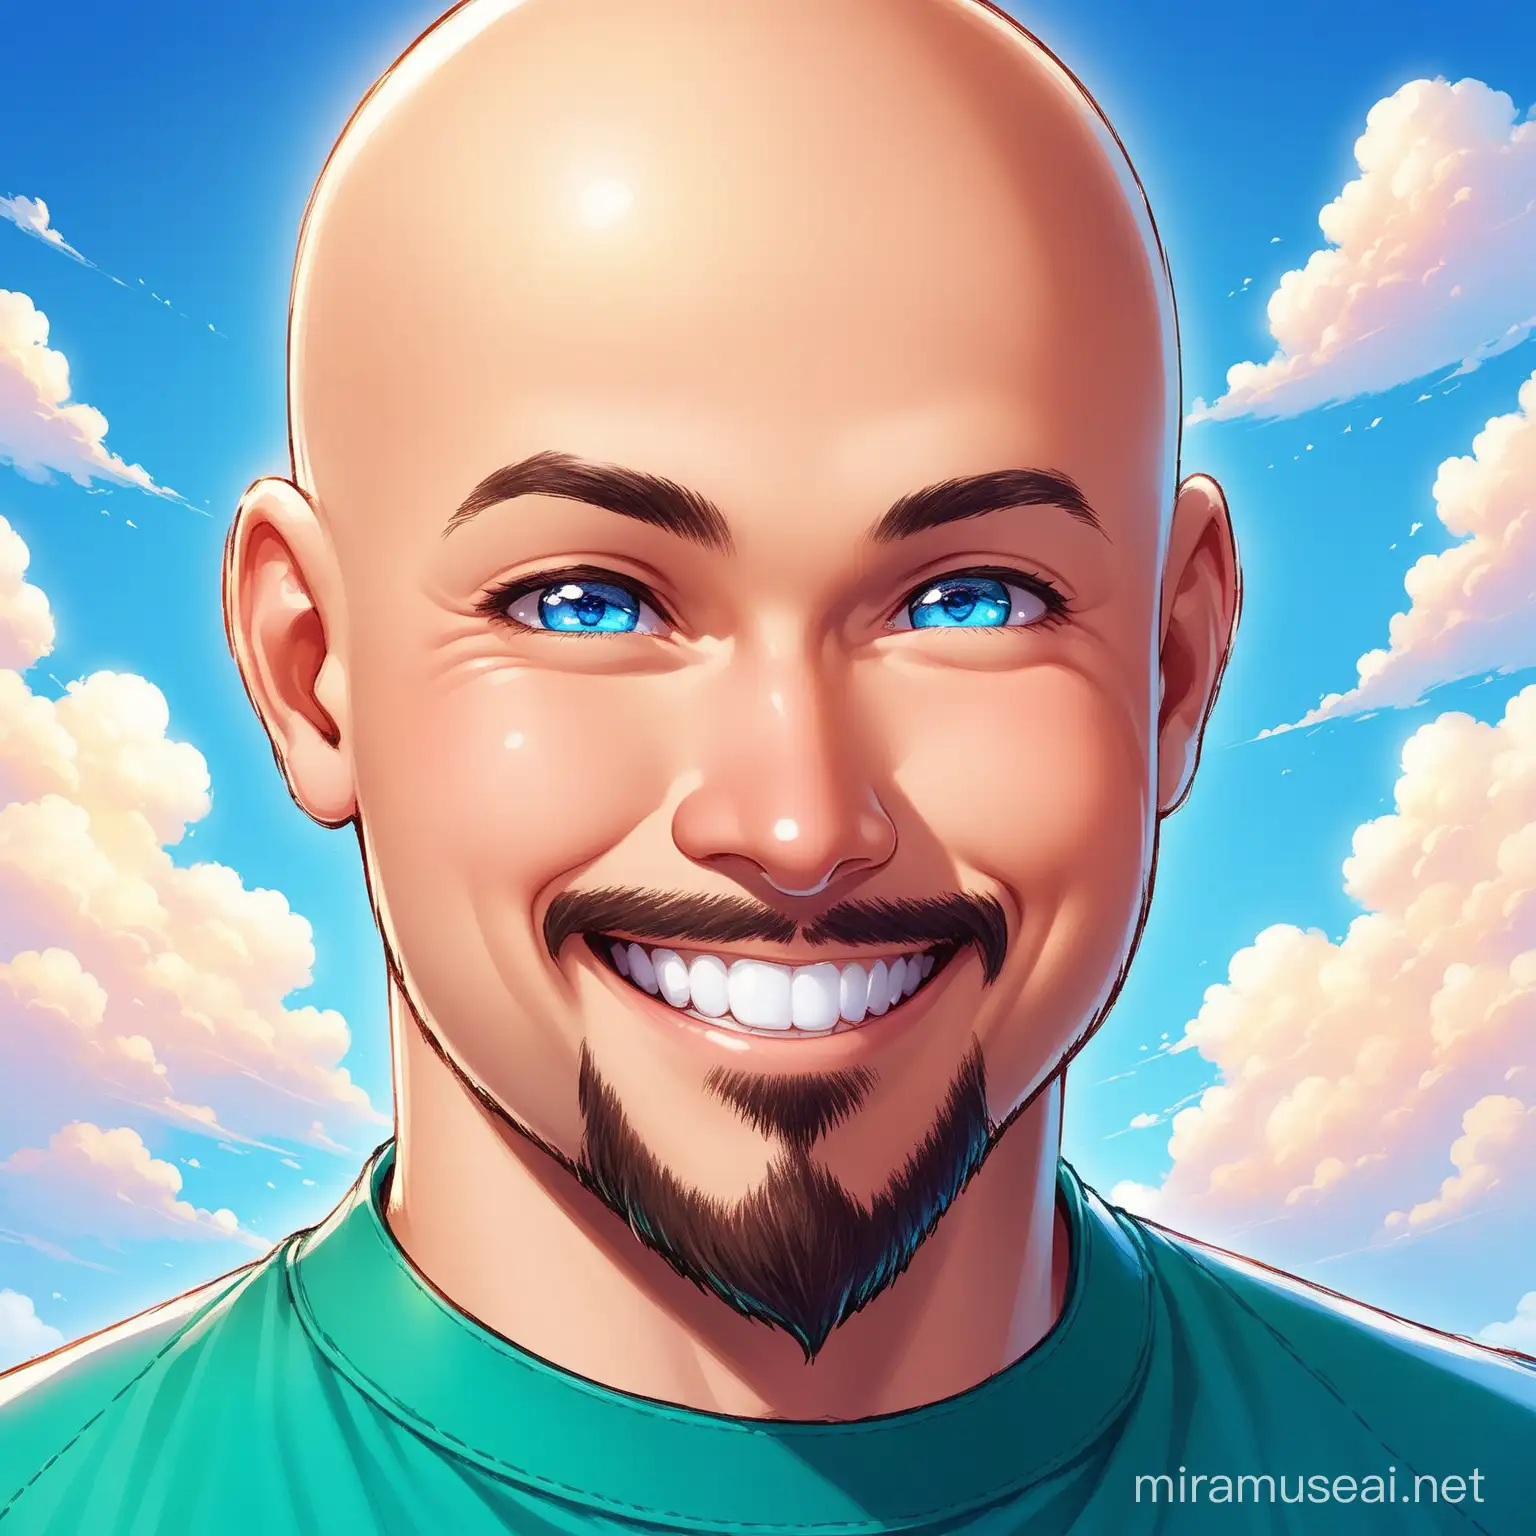 Dan is a people person, likes to laugh, is bald by choice, blue eyes, round smiling face and trimmed goatee. Likes clouds. 